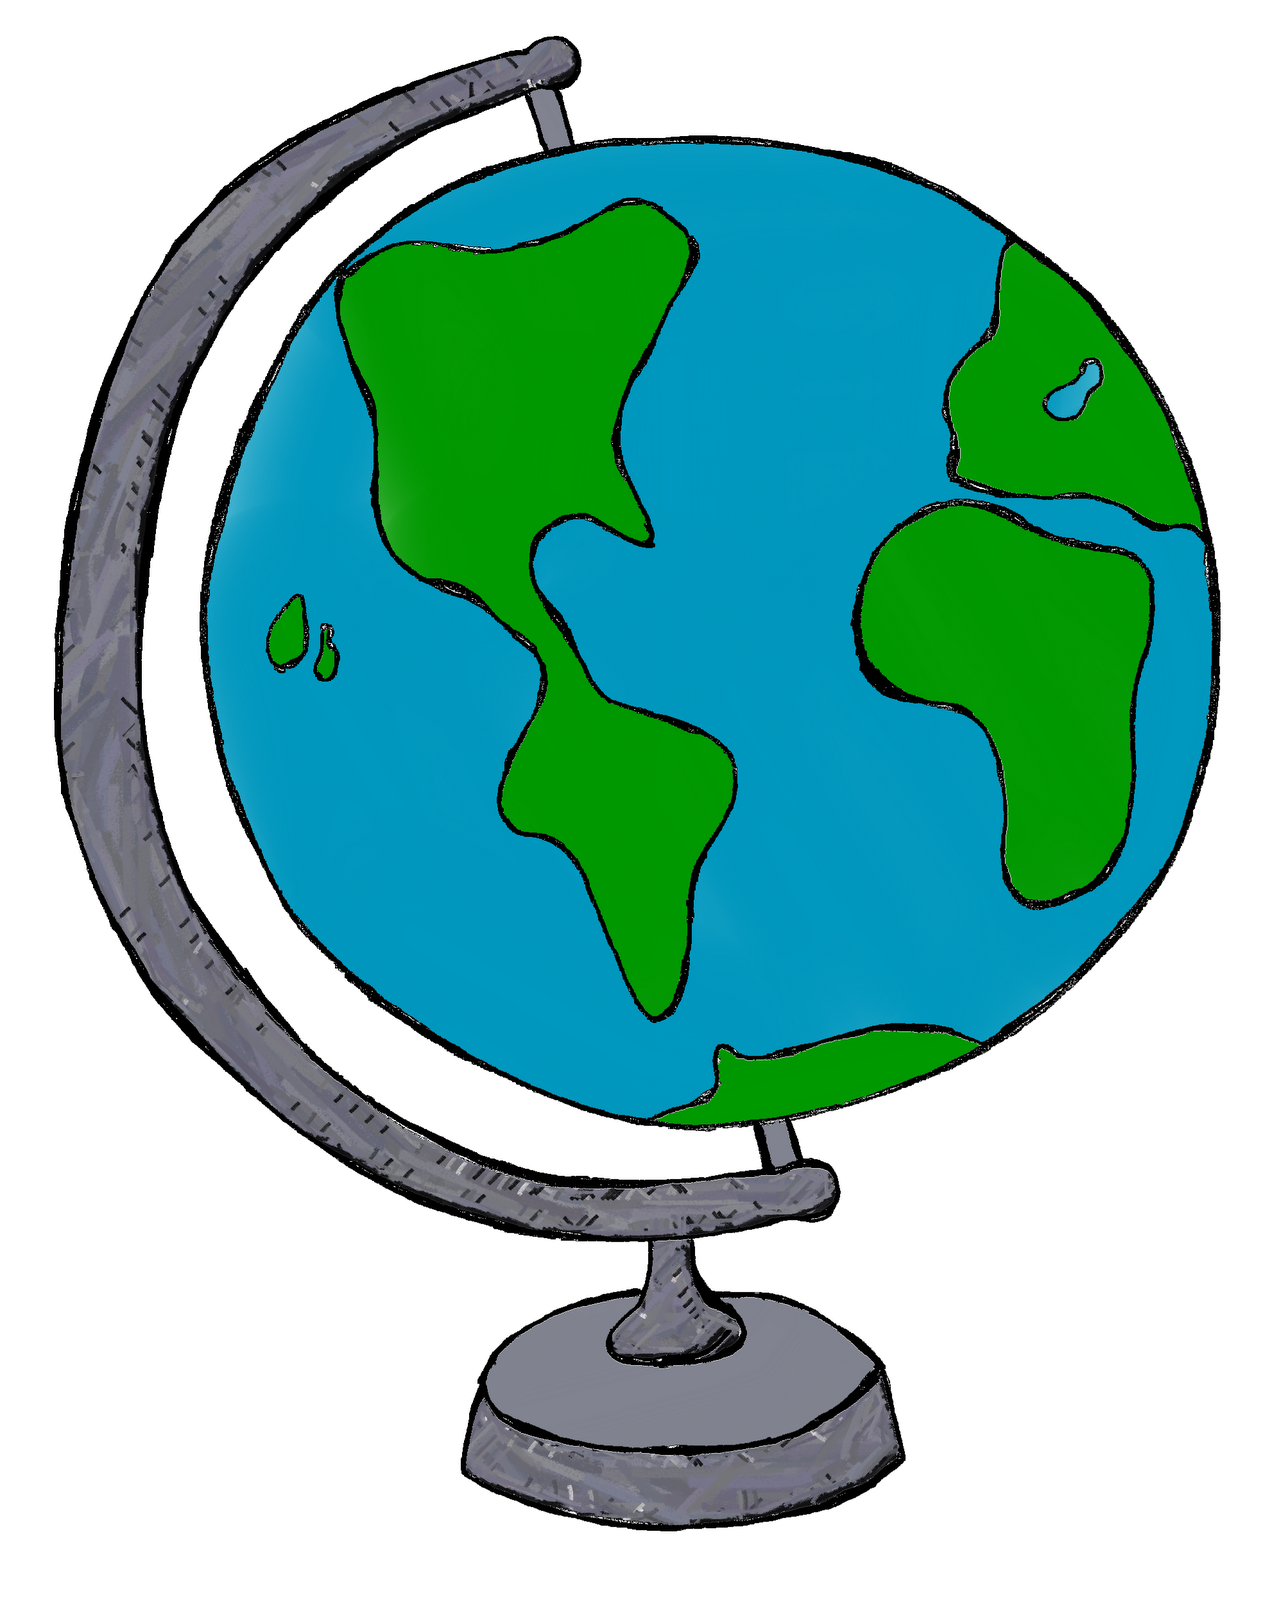 Earth globe clipart black and white free clipart images